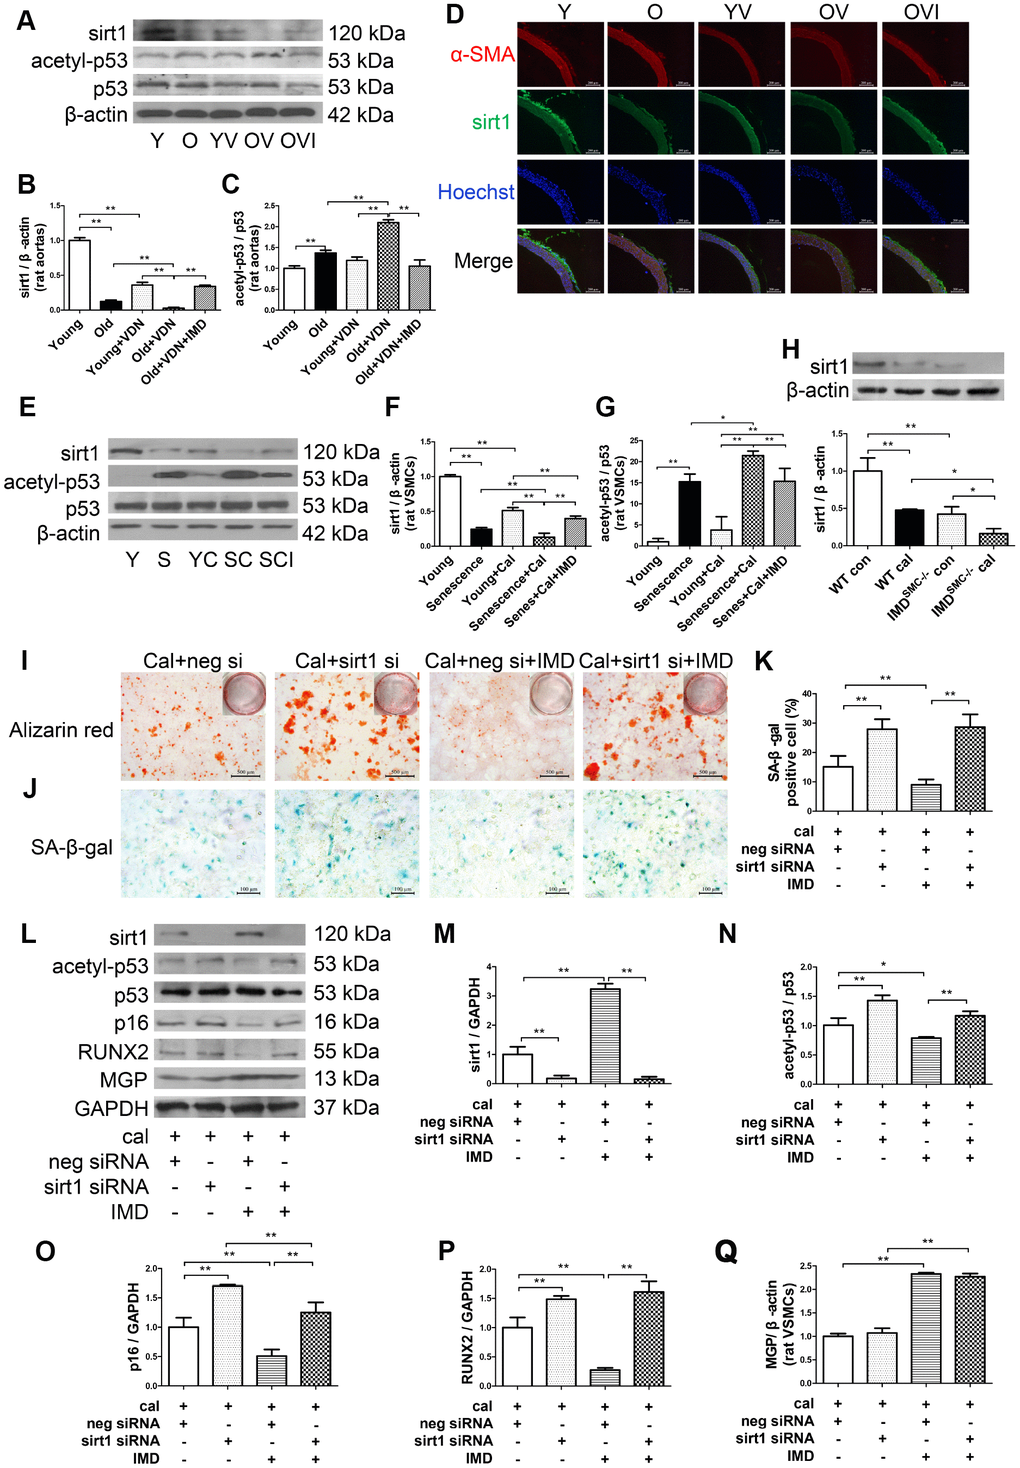 IMD1-53 inhibited aging-associated vascular calcification by increasing sirt1 expression and deacetylase activity. (A) Western blot analysis of protein levels of sirt1, acetylation p53 (acetyl-p53), and total p53 (p53) in rat aortas, and (B, C) quantification (n=3). (D) Immunofluorescence staining for α-SMA (red) and sirt1 (green) in rat aortas. Nuclei were stained with Hoechst 33342 (blue). Merged images (α-SMA, sirt1 and nuclei) are shown (Scale bar=200 μm). (E) Western blot analysis of protein levels of sirt1, acetyl-p53, and p53 in rat VSMCs and (F, G) quantification (n=3). (H) Western blot analysis and quantification of protein level of sirt1 in WT and IMDSMC-/- mouse VSMCs (n=3). (I) Alizarin red staining (red) (Scale bar=500 μm) and (J) SA-β-gal staining (blue) (Scale bar=100 μm) of calcified-rat senescent VSMCs treated with IMD1-53 plus sirt1 siRNA or negative siRNA, and (K) quantification of β-galactosidase-positive staining (n=6). (L) Western blot analysis of protein levels of sirt1, acetyl-p53, p53, p16, RUNX2 and MGP and (M–Q) quantification (n=3). For in vivo experiments, Y=young rats; O=old rats; YV=young+VDN; OV=old+VDN; OVI=old+VDN+IMD1-53. For in vitro experiments, Y=young VSMCs; S=senescent VSMCs; YC=young+calcification; SC=senescence+calcification; SCI=senescence+calcification+IMD1-53. WT=wild type. IMDSMC-/-=VSMC-specific IMD-deficient. Con=control. Cal= calcification. neg si=negative siRNA. sirt1 si=sirt1 siRNA. Cal=calcification. Data are mean ± SD. *PP